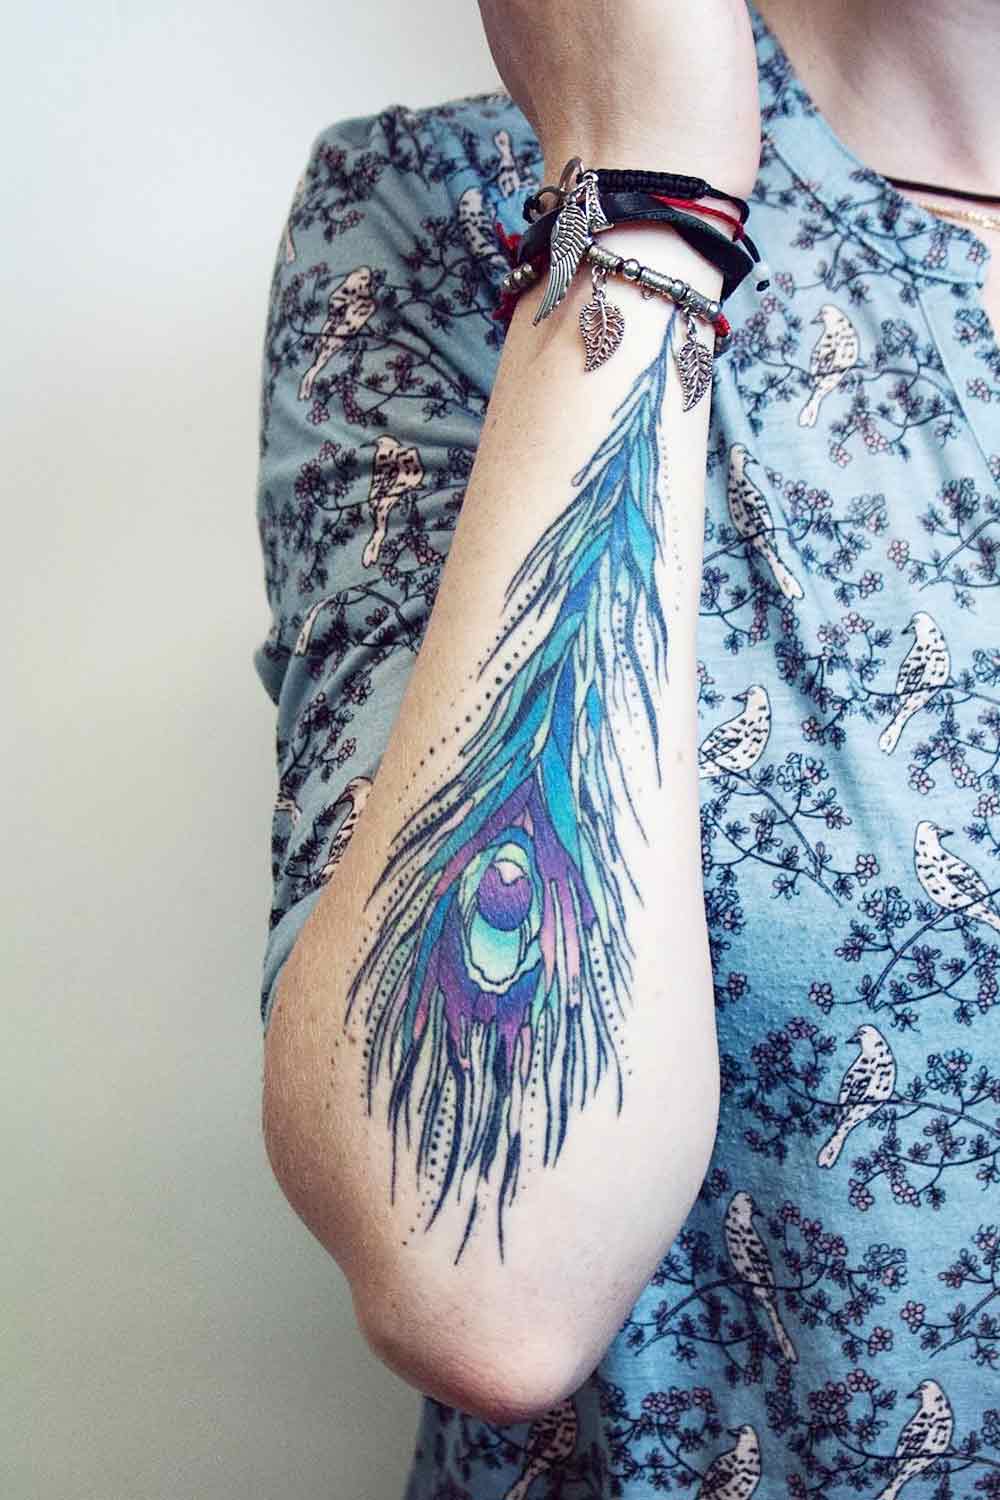 peacock feather tattoos on arm